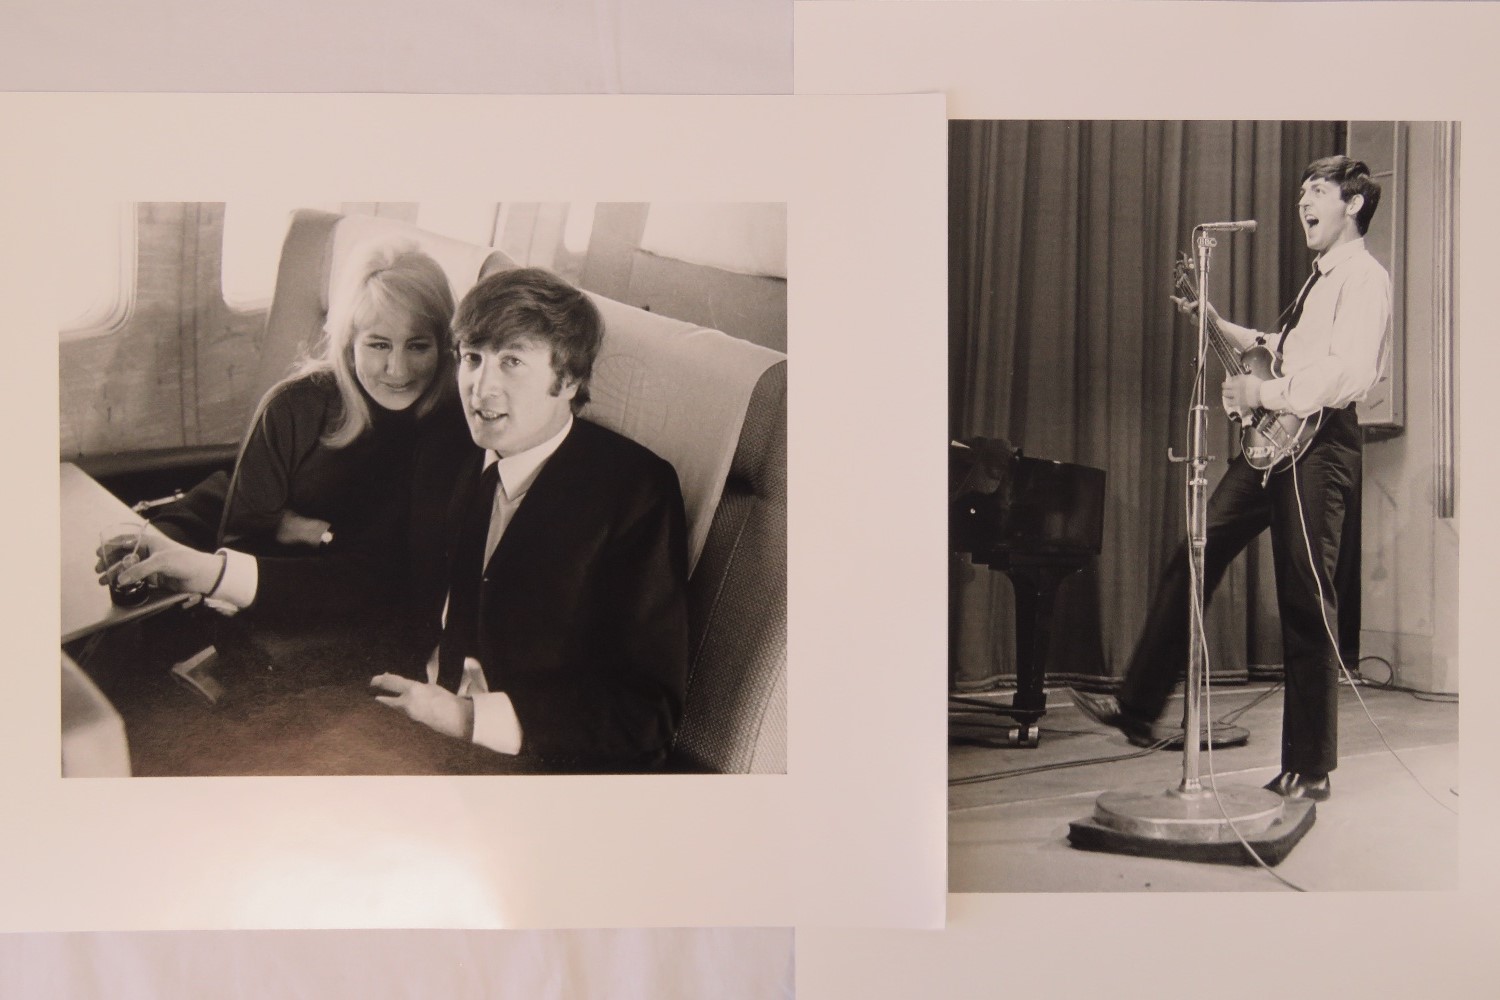 Paul McCartney on stage in 1963 and John Lennon with Cynthia on a 'flight to New York 1964',